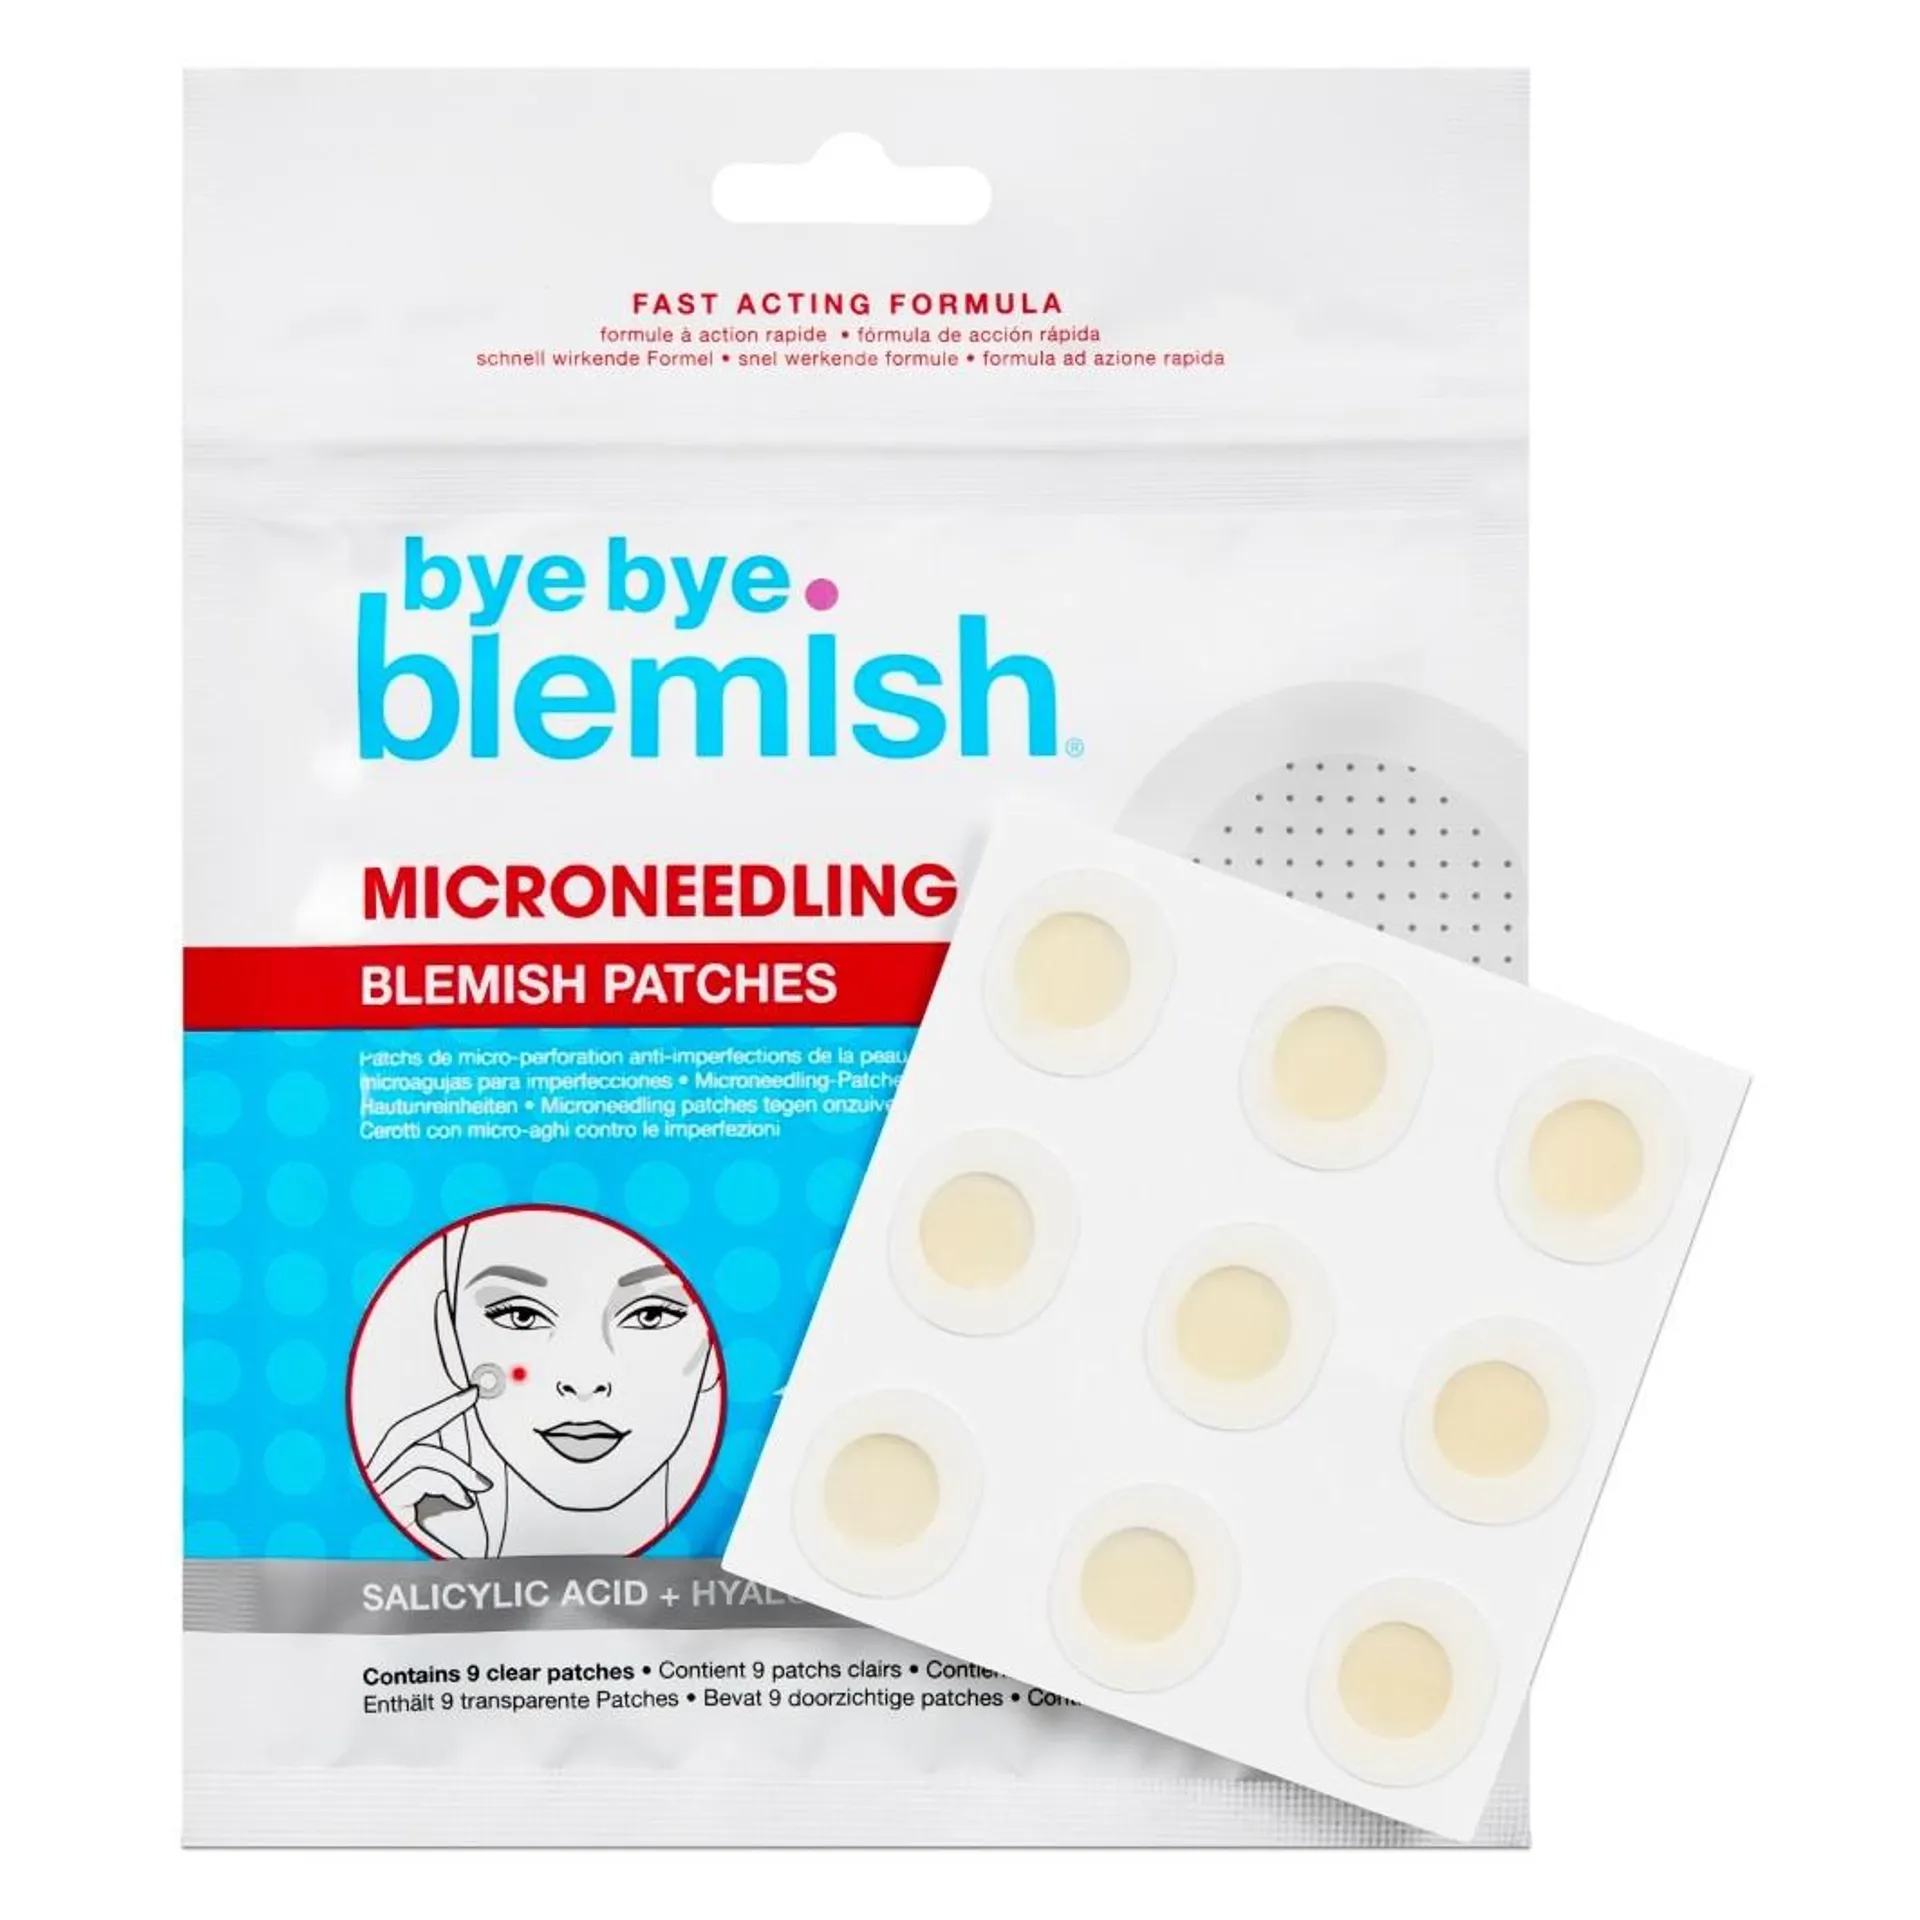 Microneedling Blemish Patches